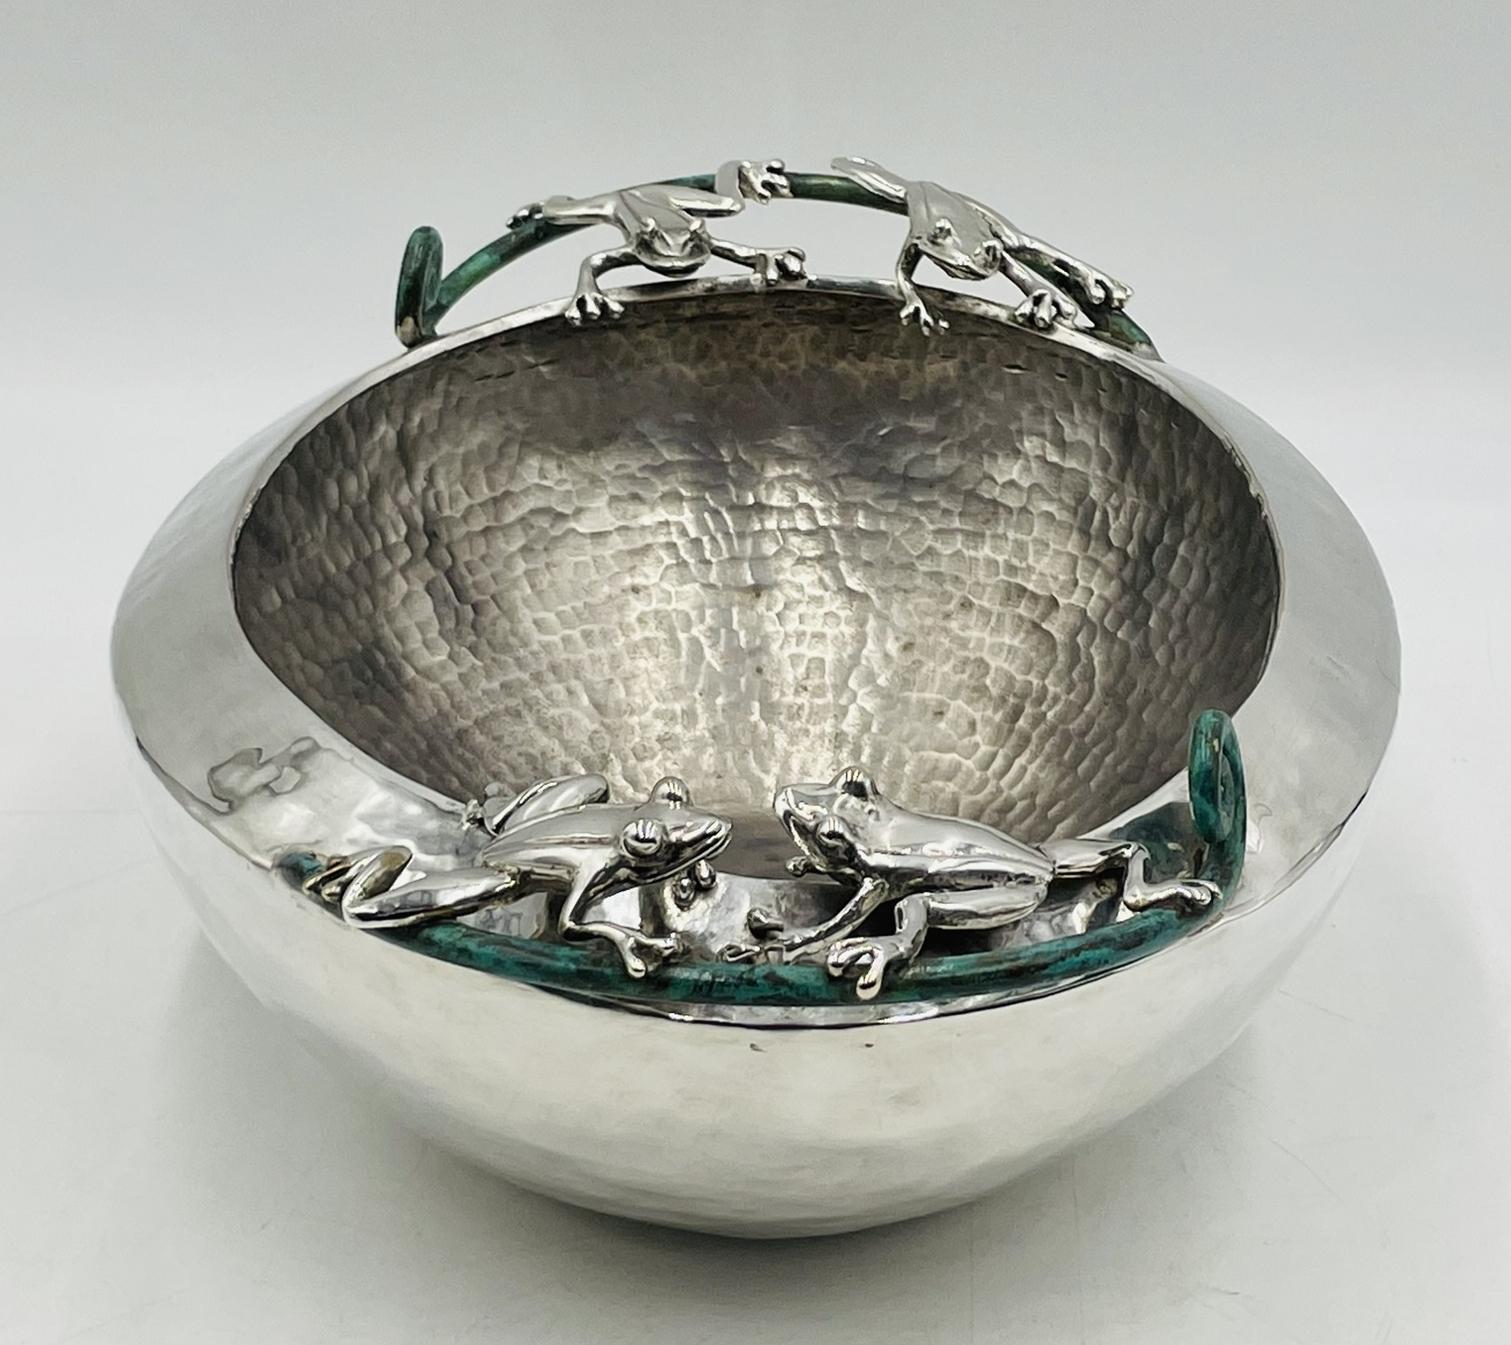 Mexican Large Silver-Plated Bowl With Frogs Handles by Emilia Castillo, Mexico 21st Cent For Sale